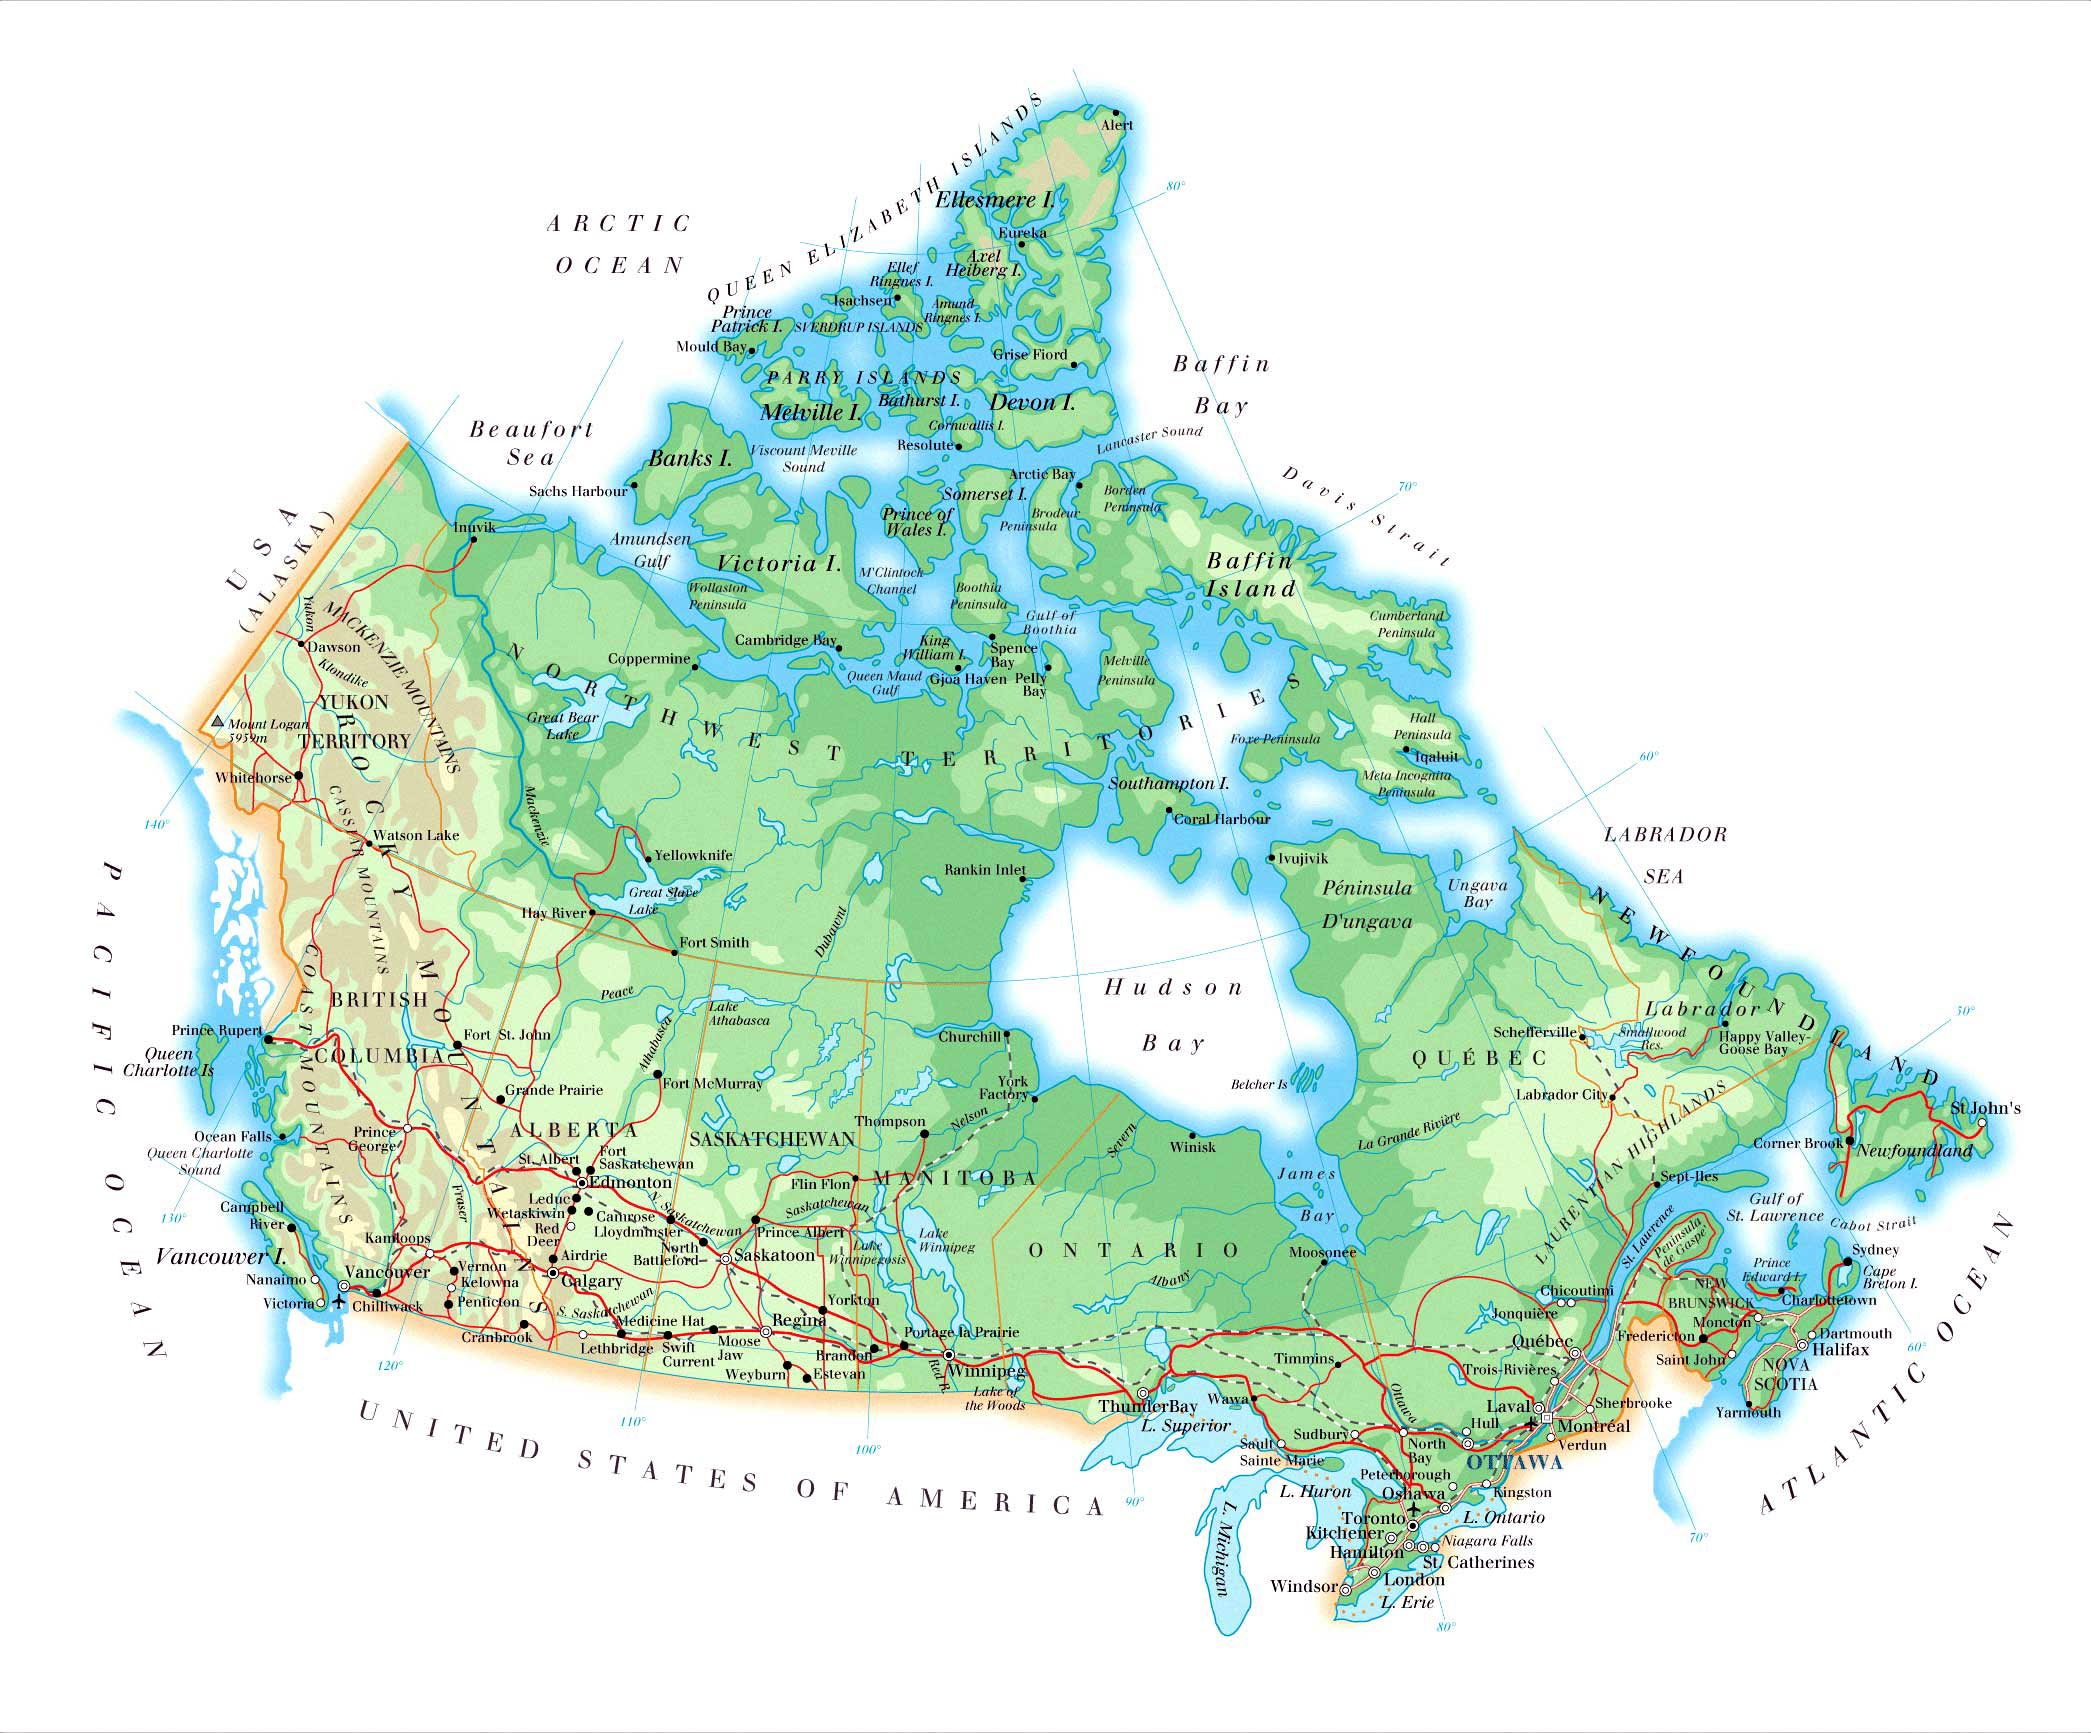 Canada Maps | Printable Maps Of Canada For Download - Printable Road Map Of Canada